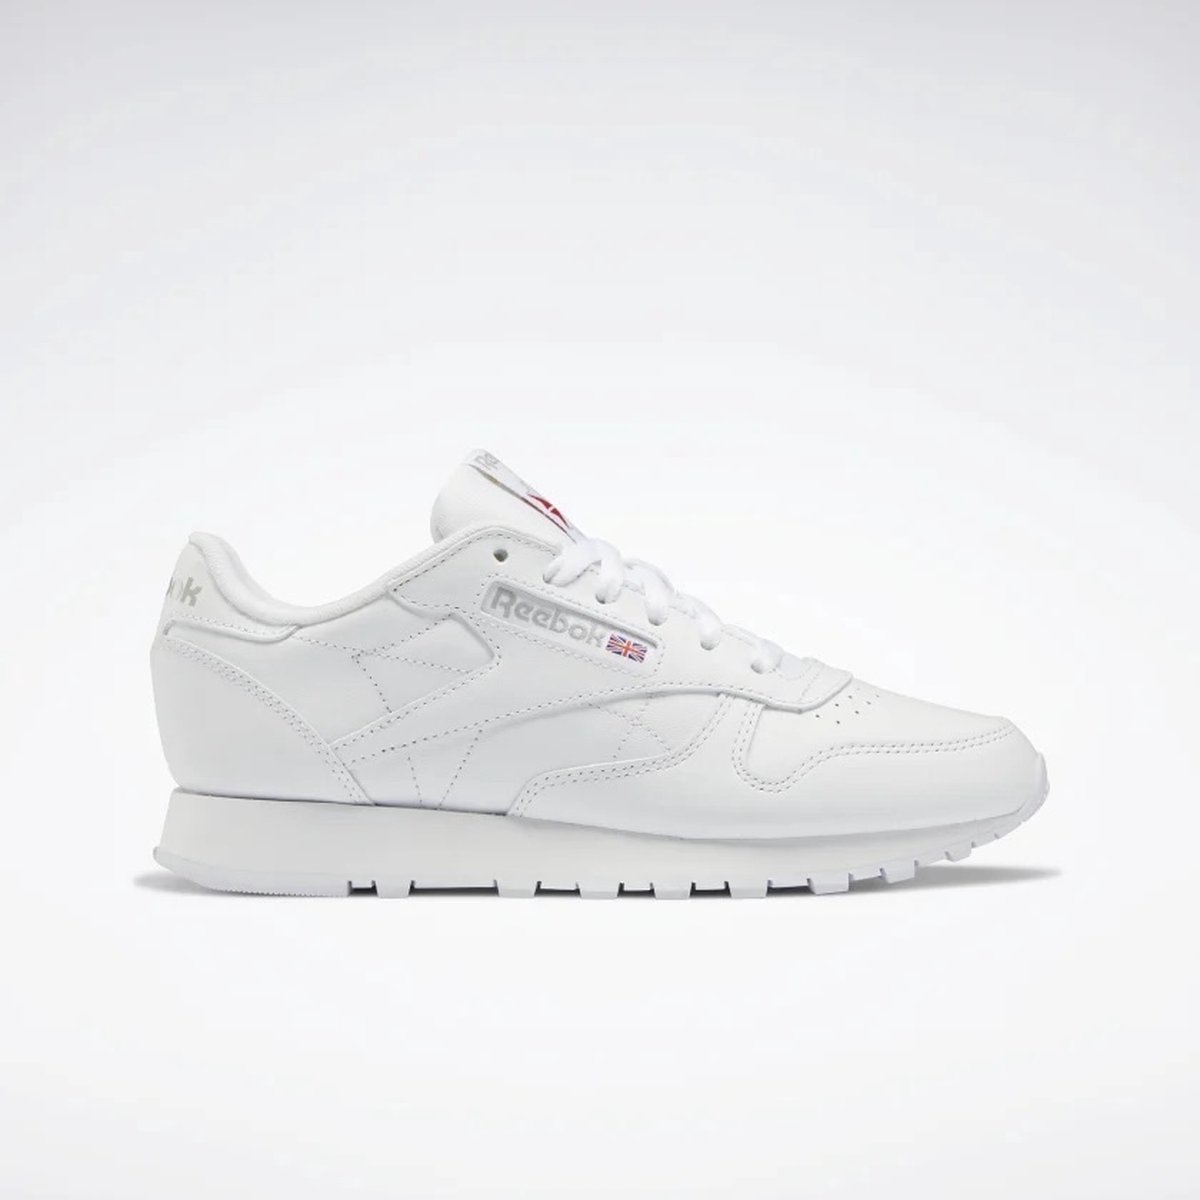 Reebok Classic Leather Wit - Dames Sneakers - GY0957 - Maat 37